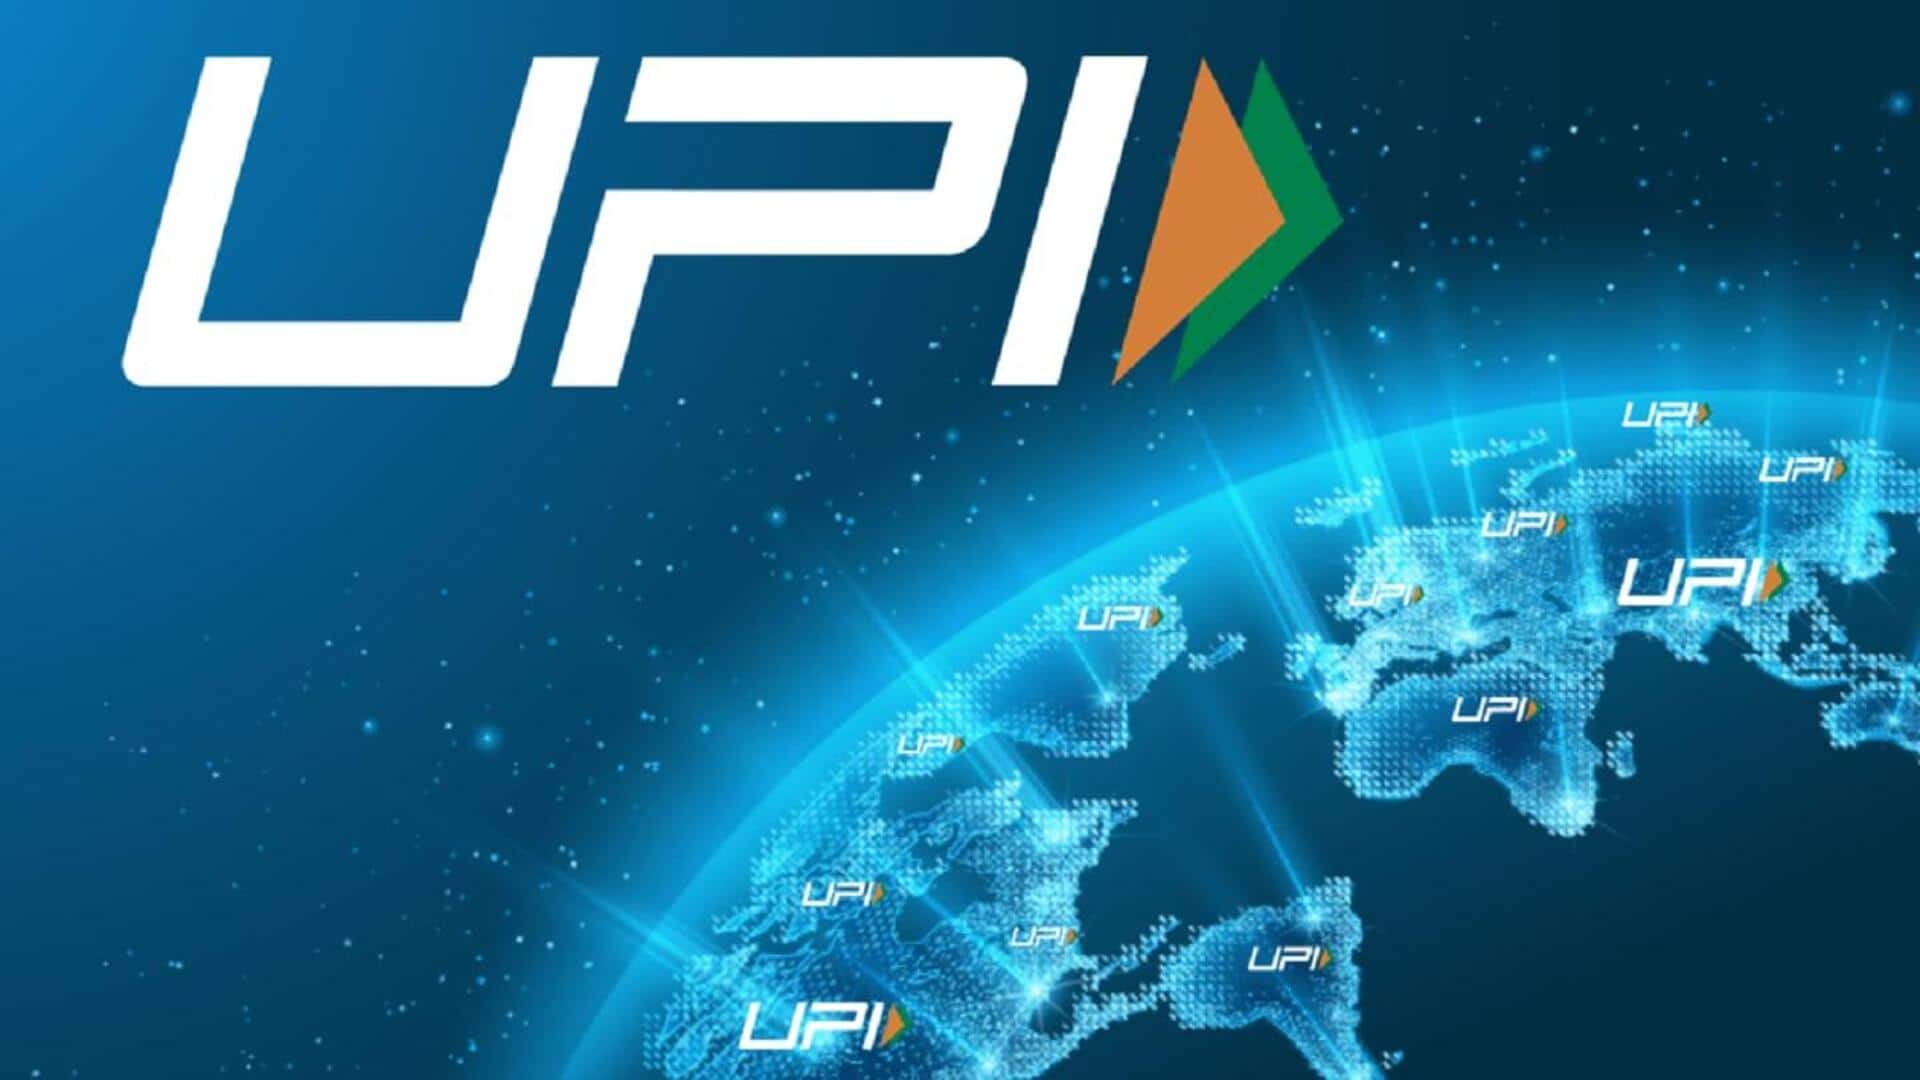 You can now use UPI to make payments in Nepal